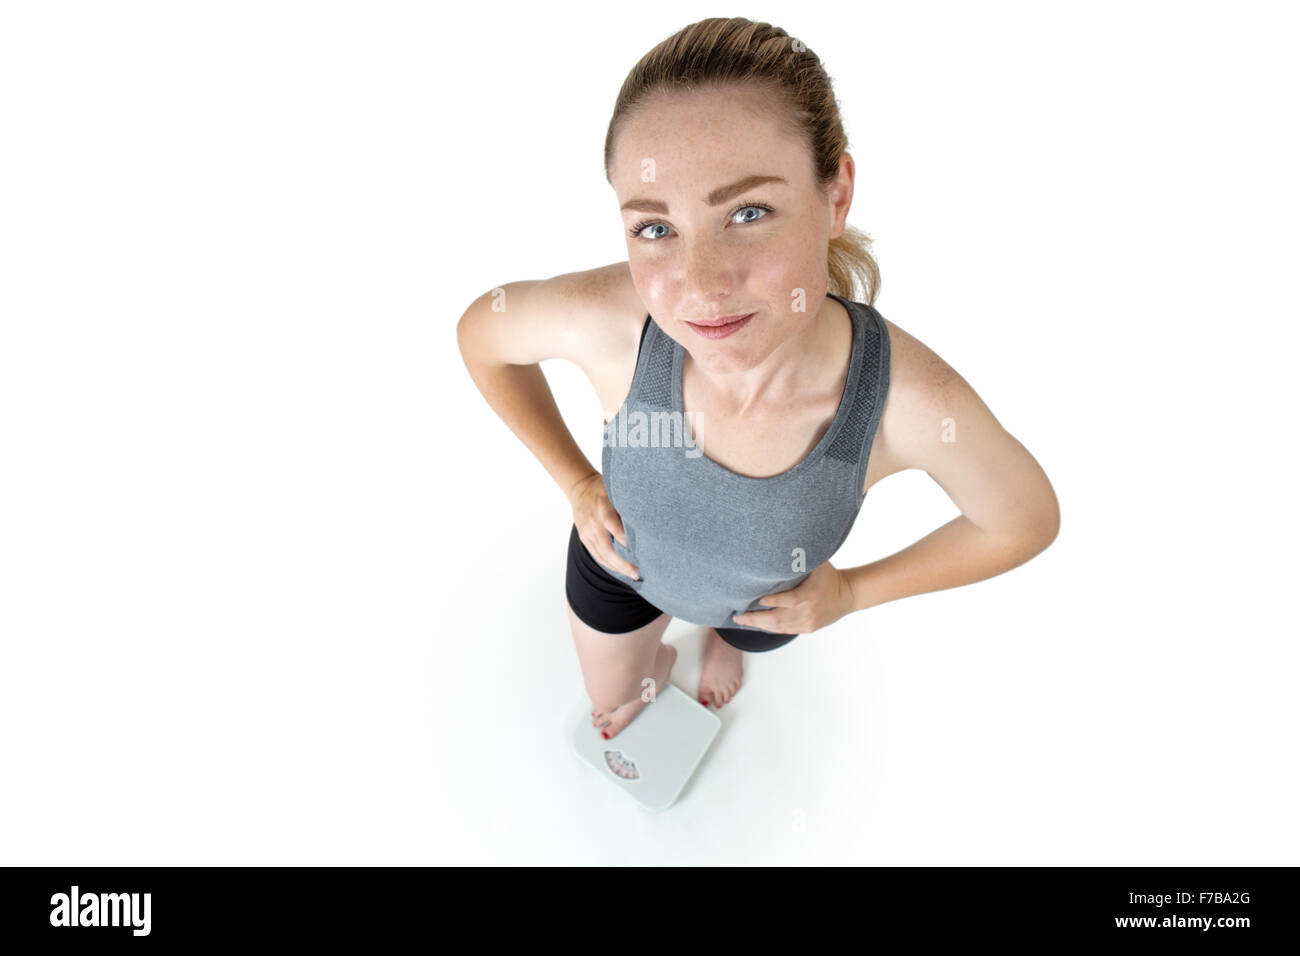 https://c8.alamy.com/comp/F7BA2G/shot-taken-from-above-of-a-slim-woman-in-her-gym-clothes-hands-on-F7BA2G.jpg